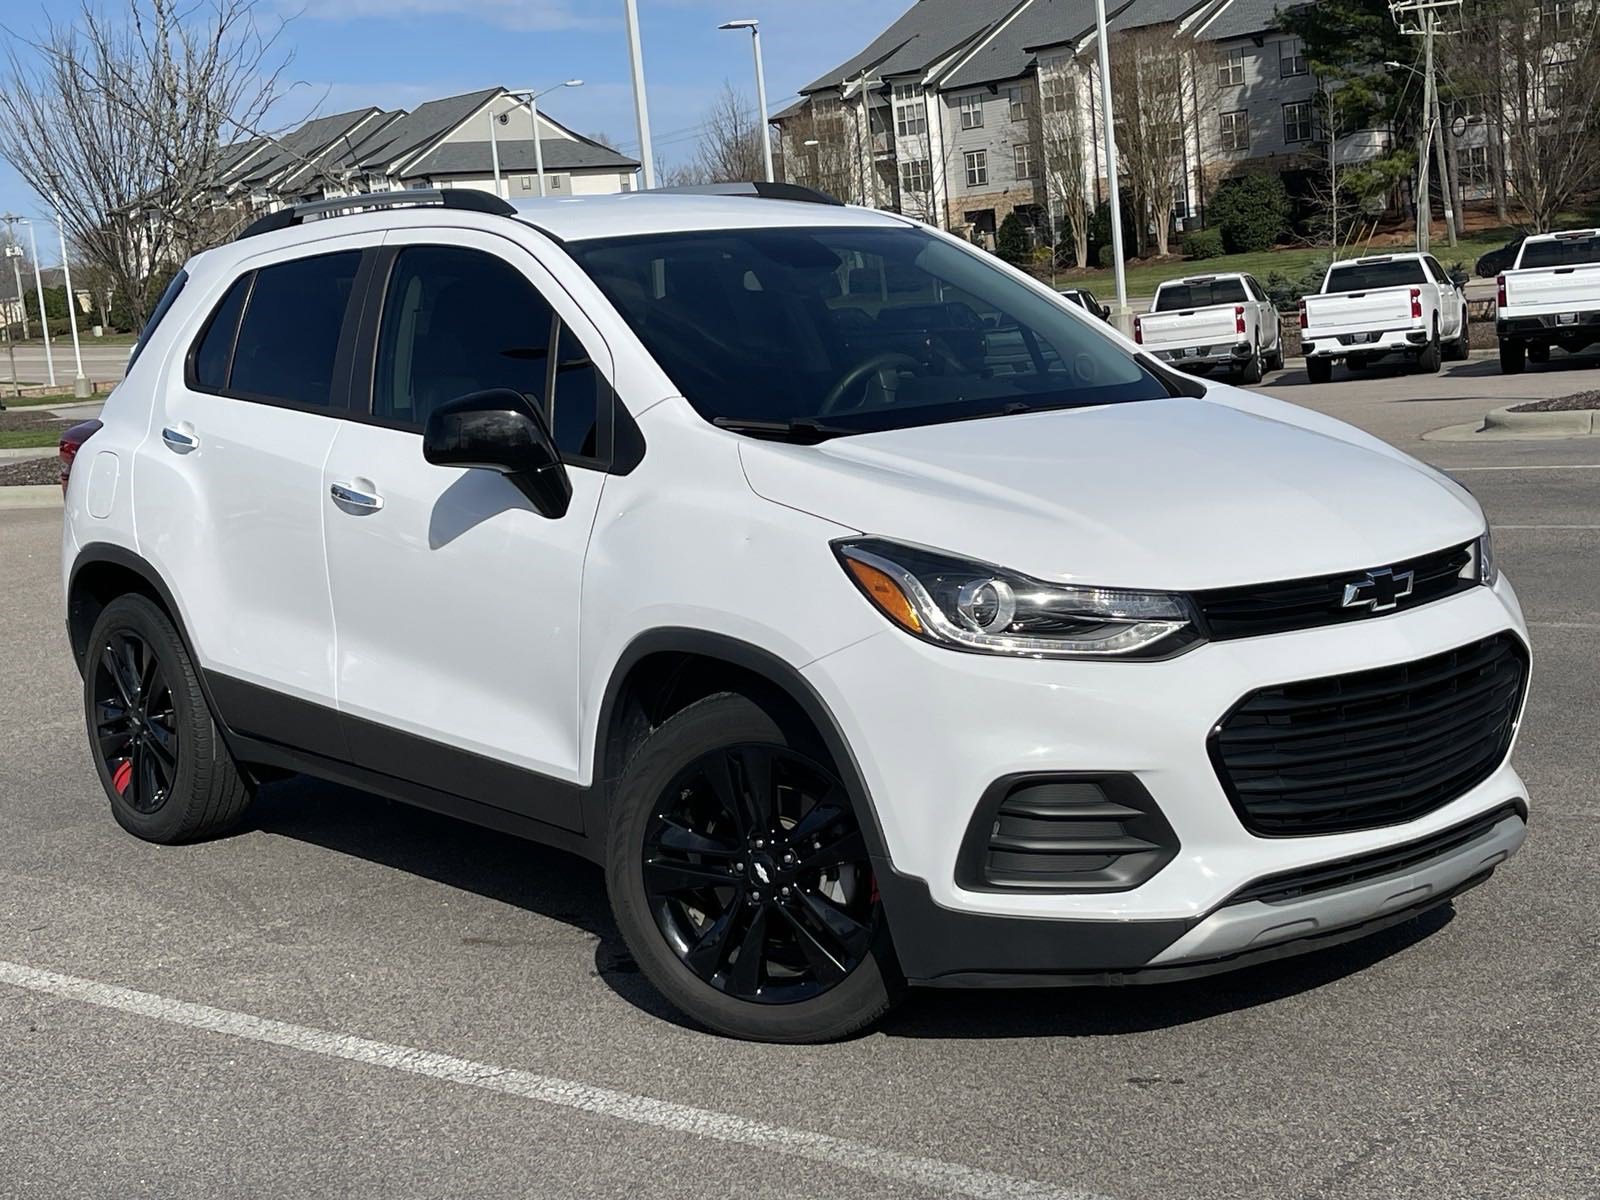 Certified Pre-Owned 2019 Chevrolet Trax LT SUV in Greensboro #P56400 |  Terry Labonte Chevrolet